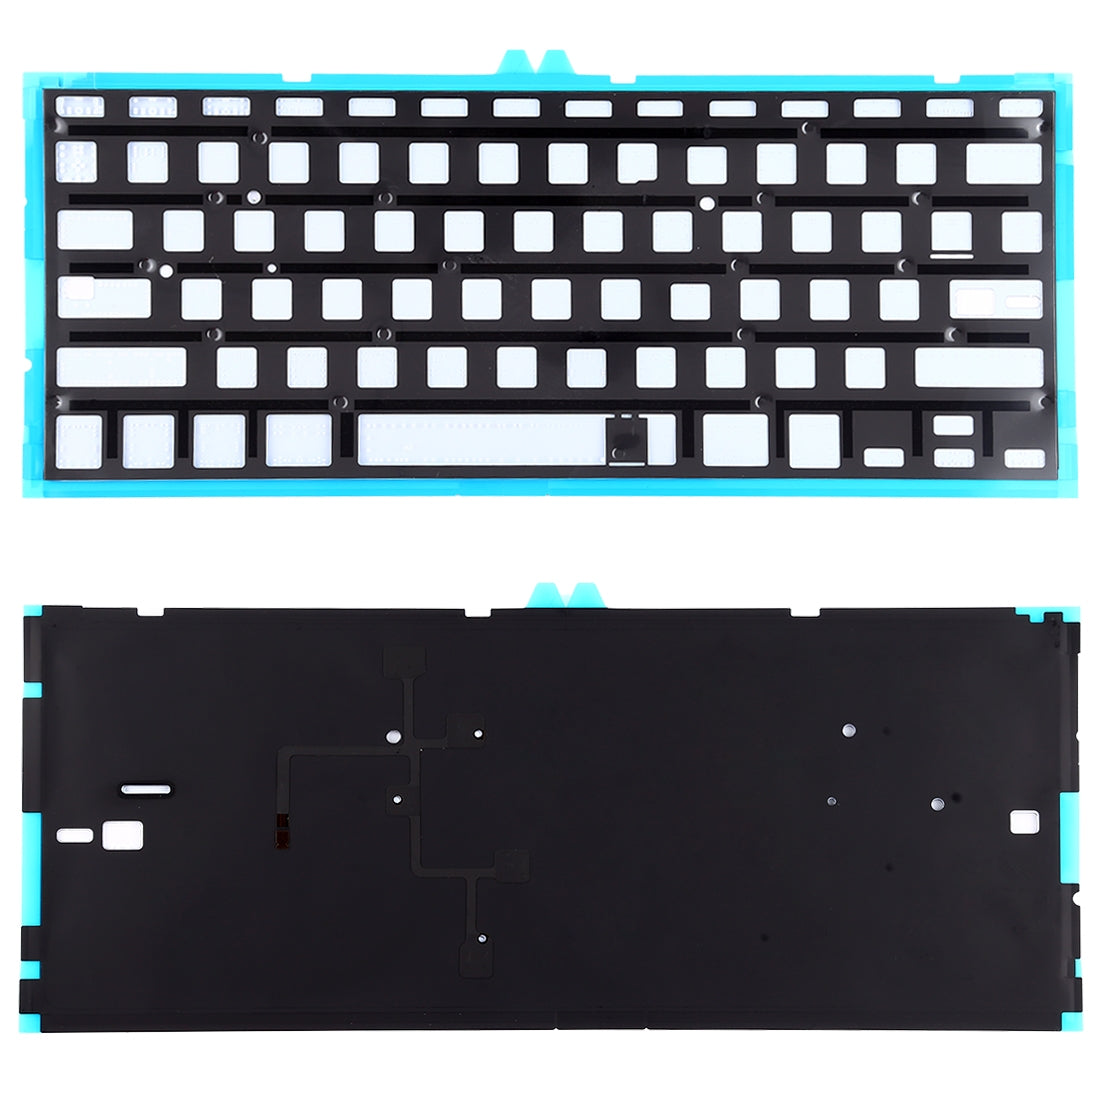 Backlight Keyboard US Version without ñ MacBook 13.3 A1369 2011 2015